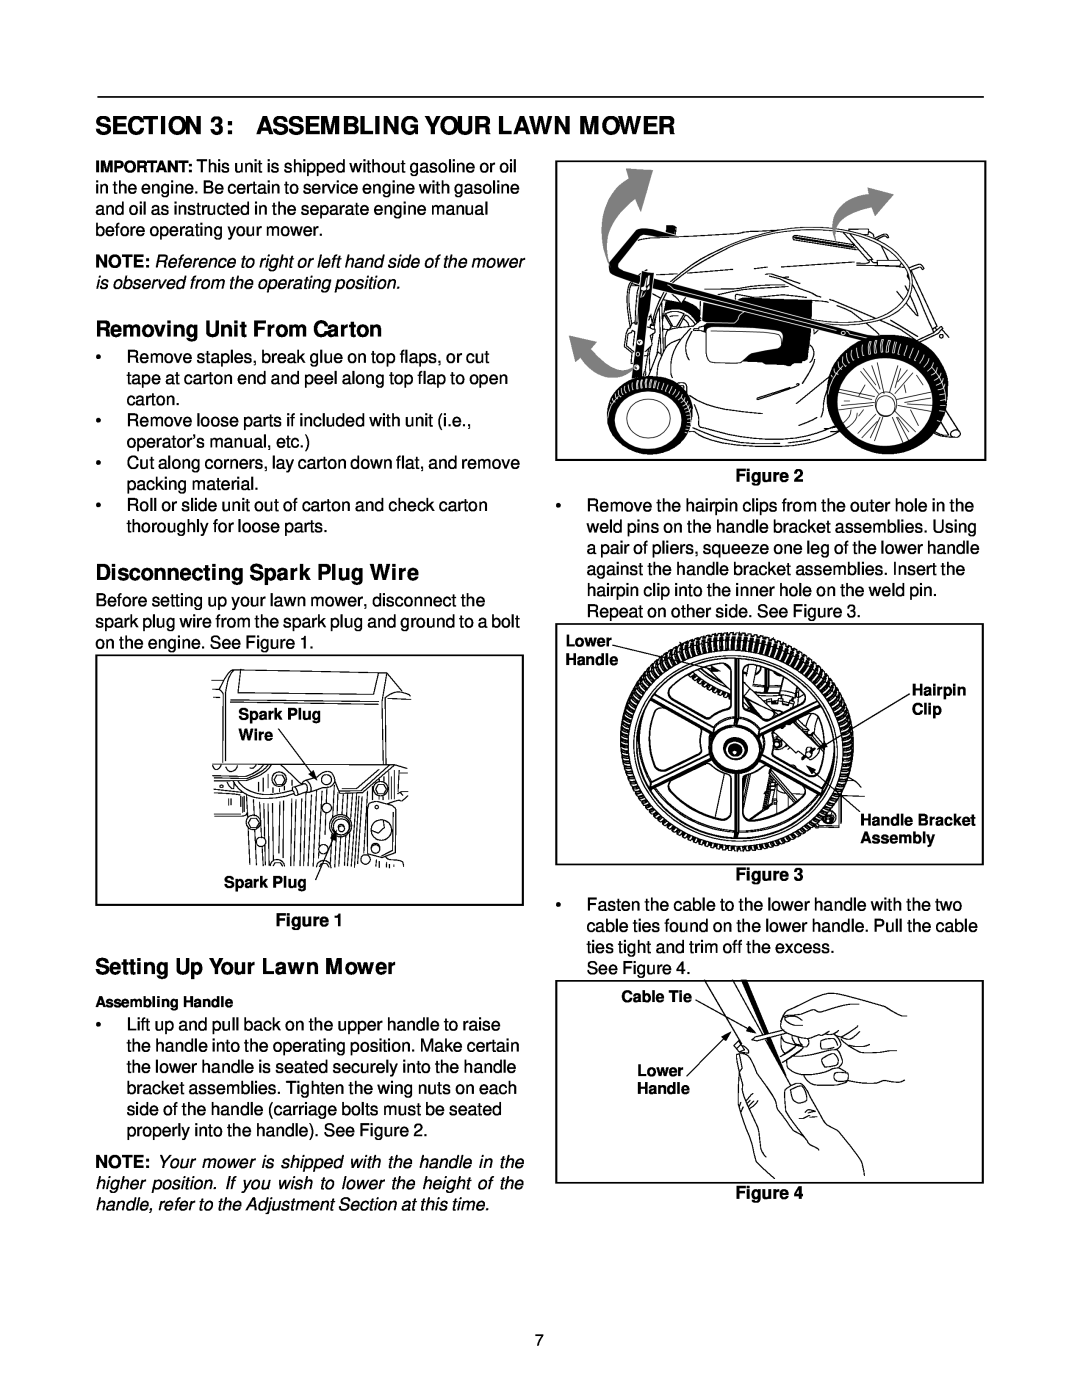 Yard-Man 11A-589 Series manual Assembling Your Lawn Mower, Removing Unit From Carton, Disconnecting Spark Plug Wire 